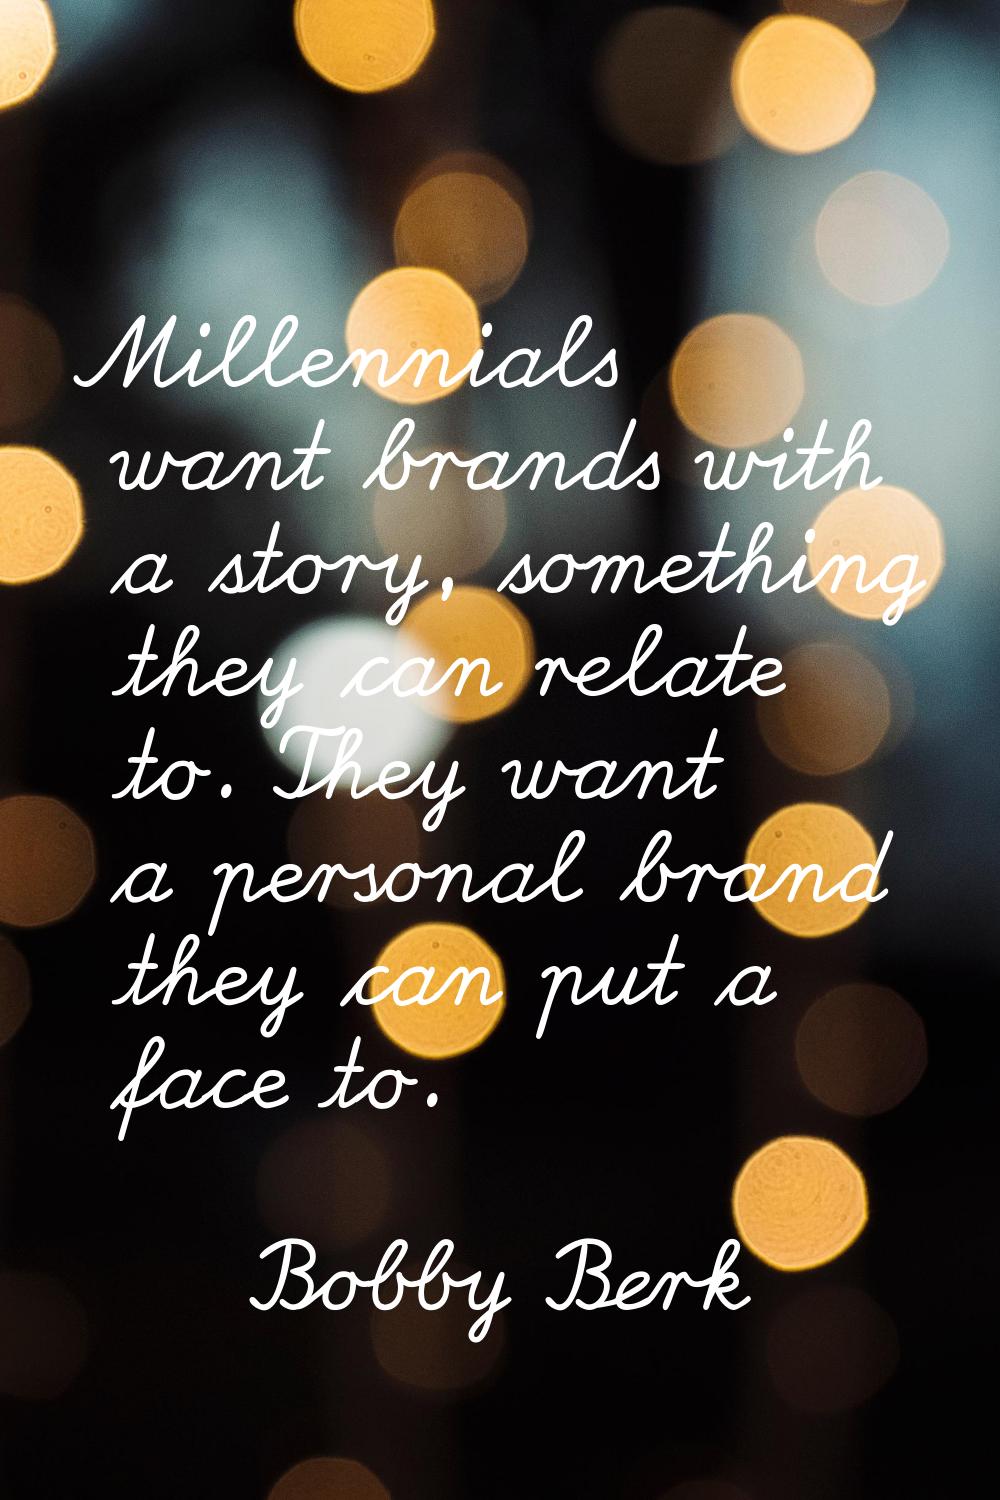 Millennials want brands with a story, something they can relate to. They want a personal brand they